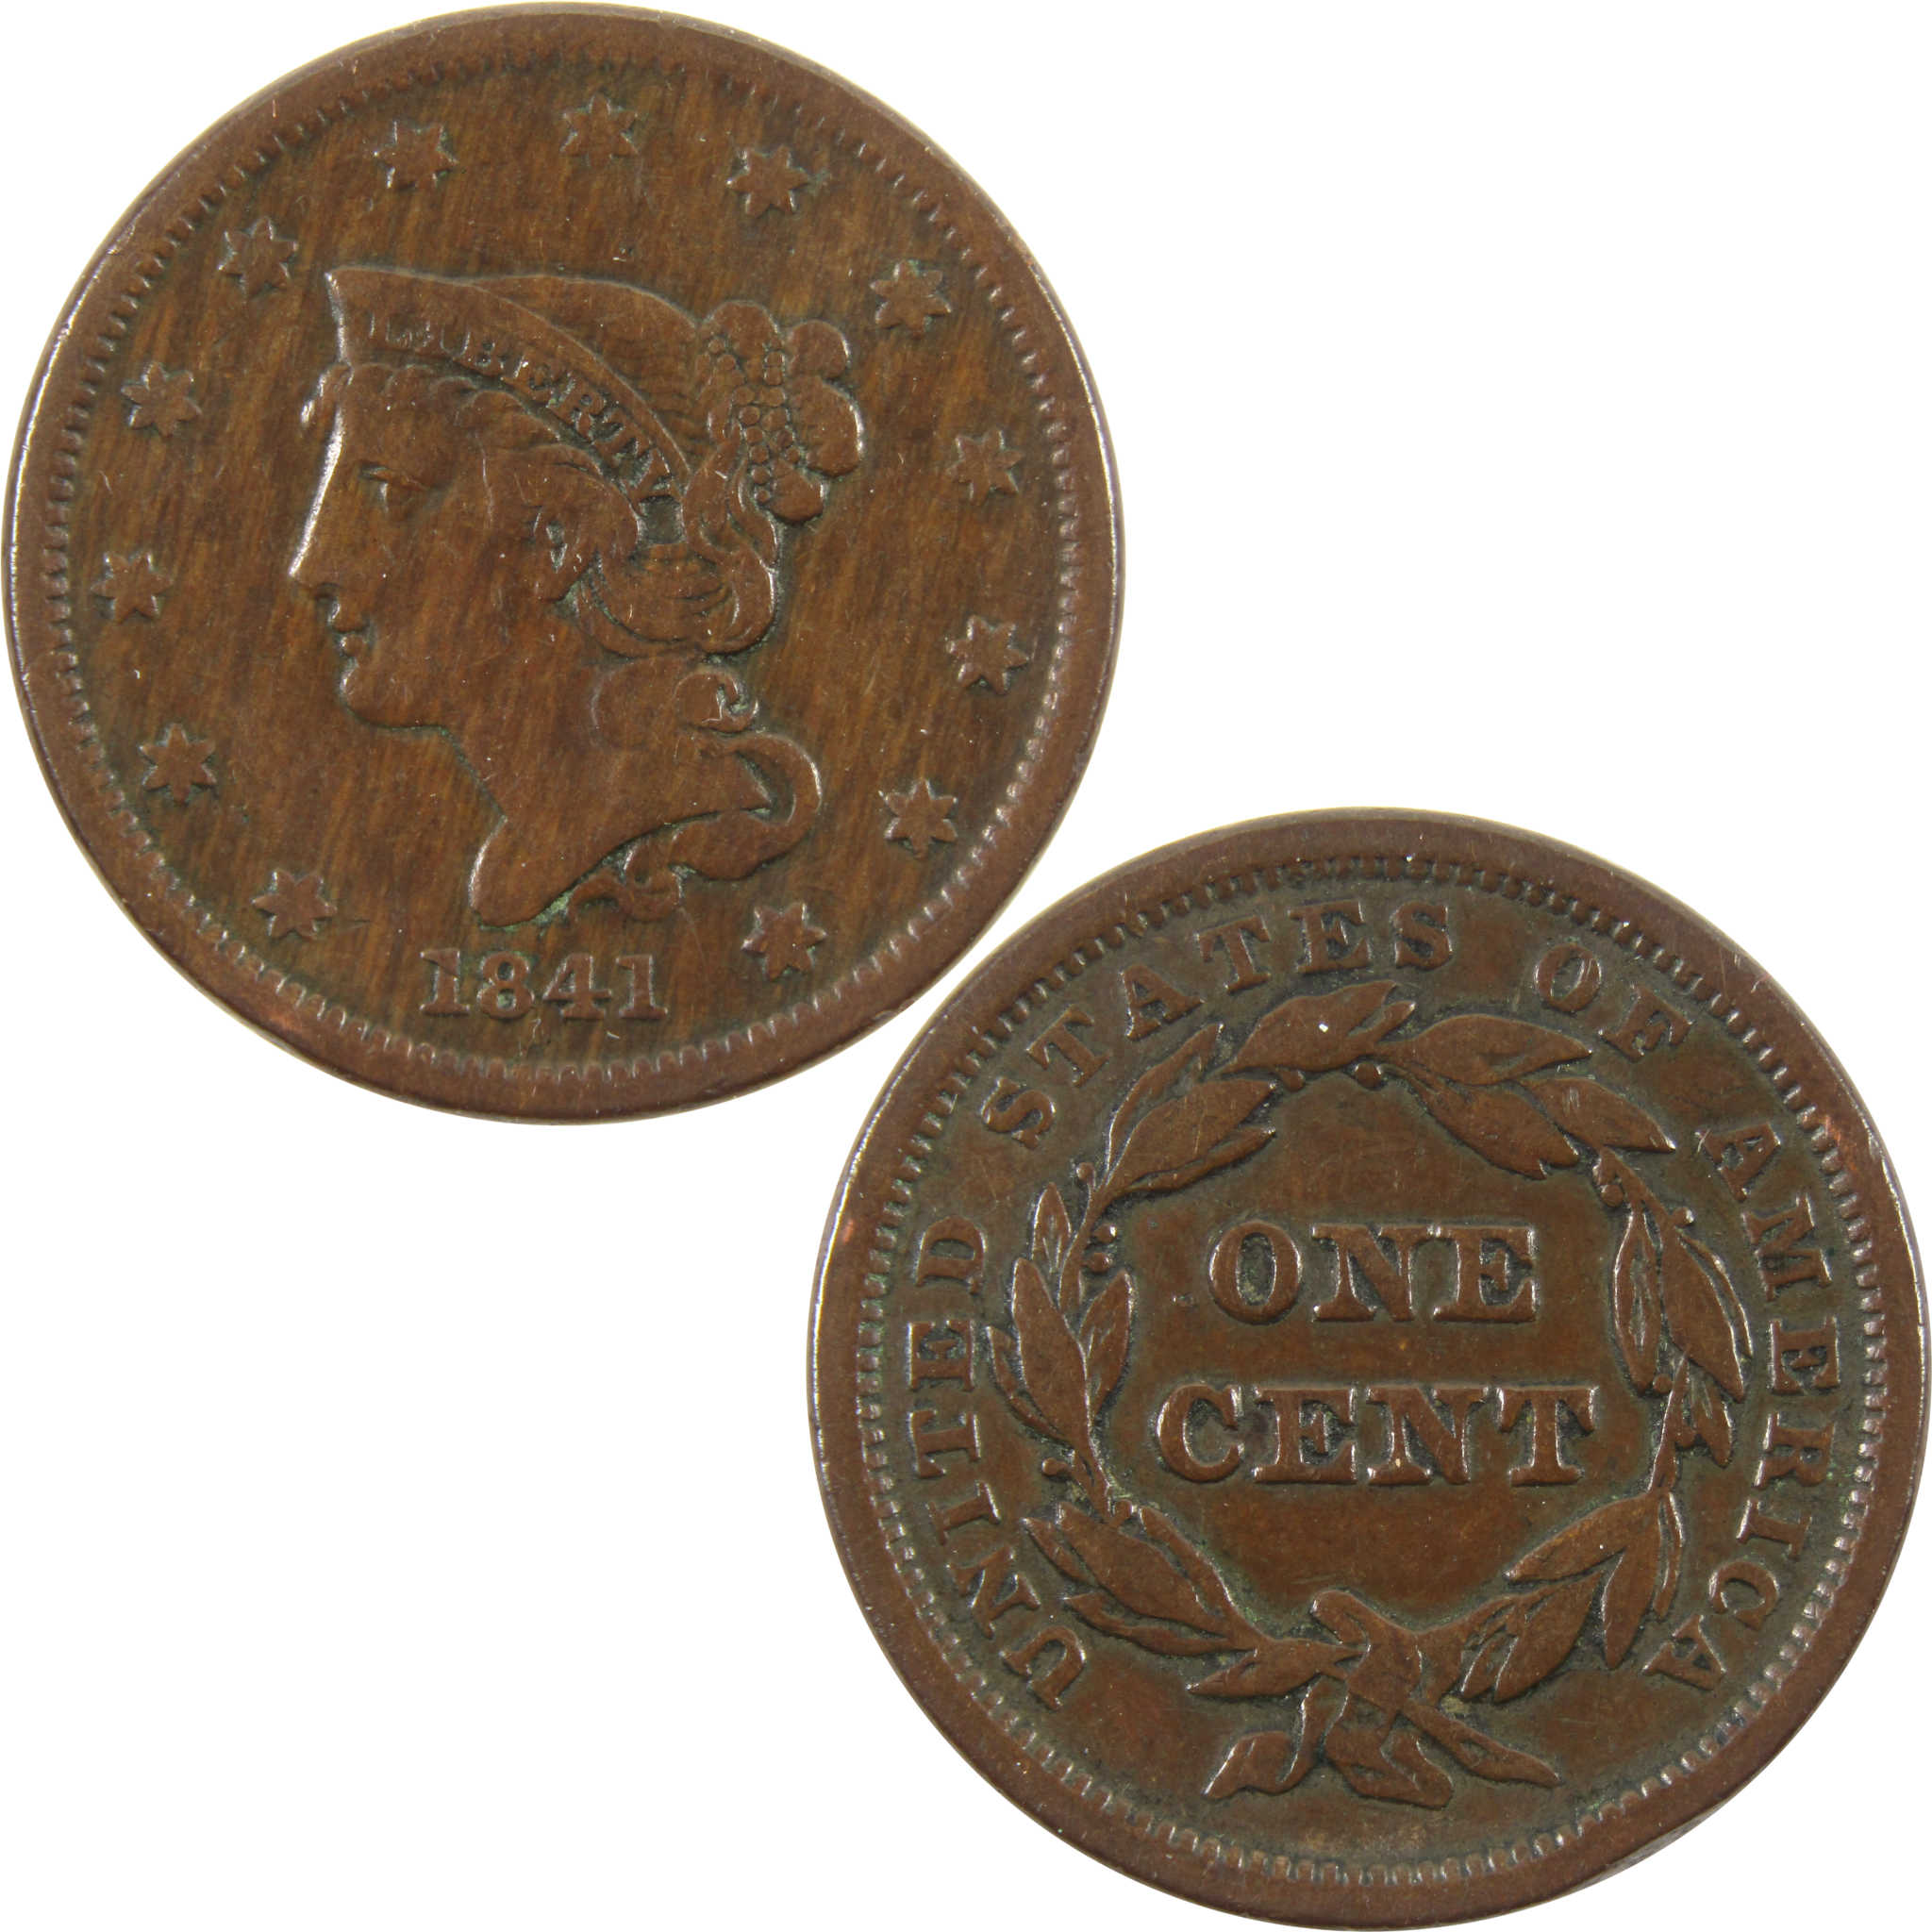 1841 Braided Hair Large Cent VF Very Fine Copper Penny 1c SKU:I10950